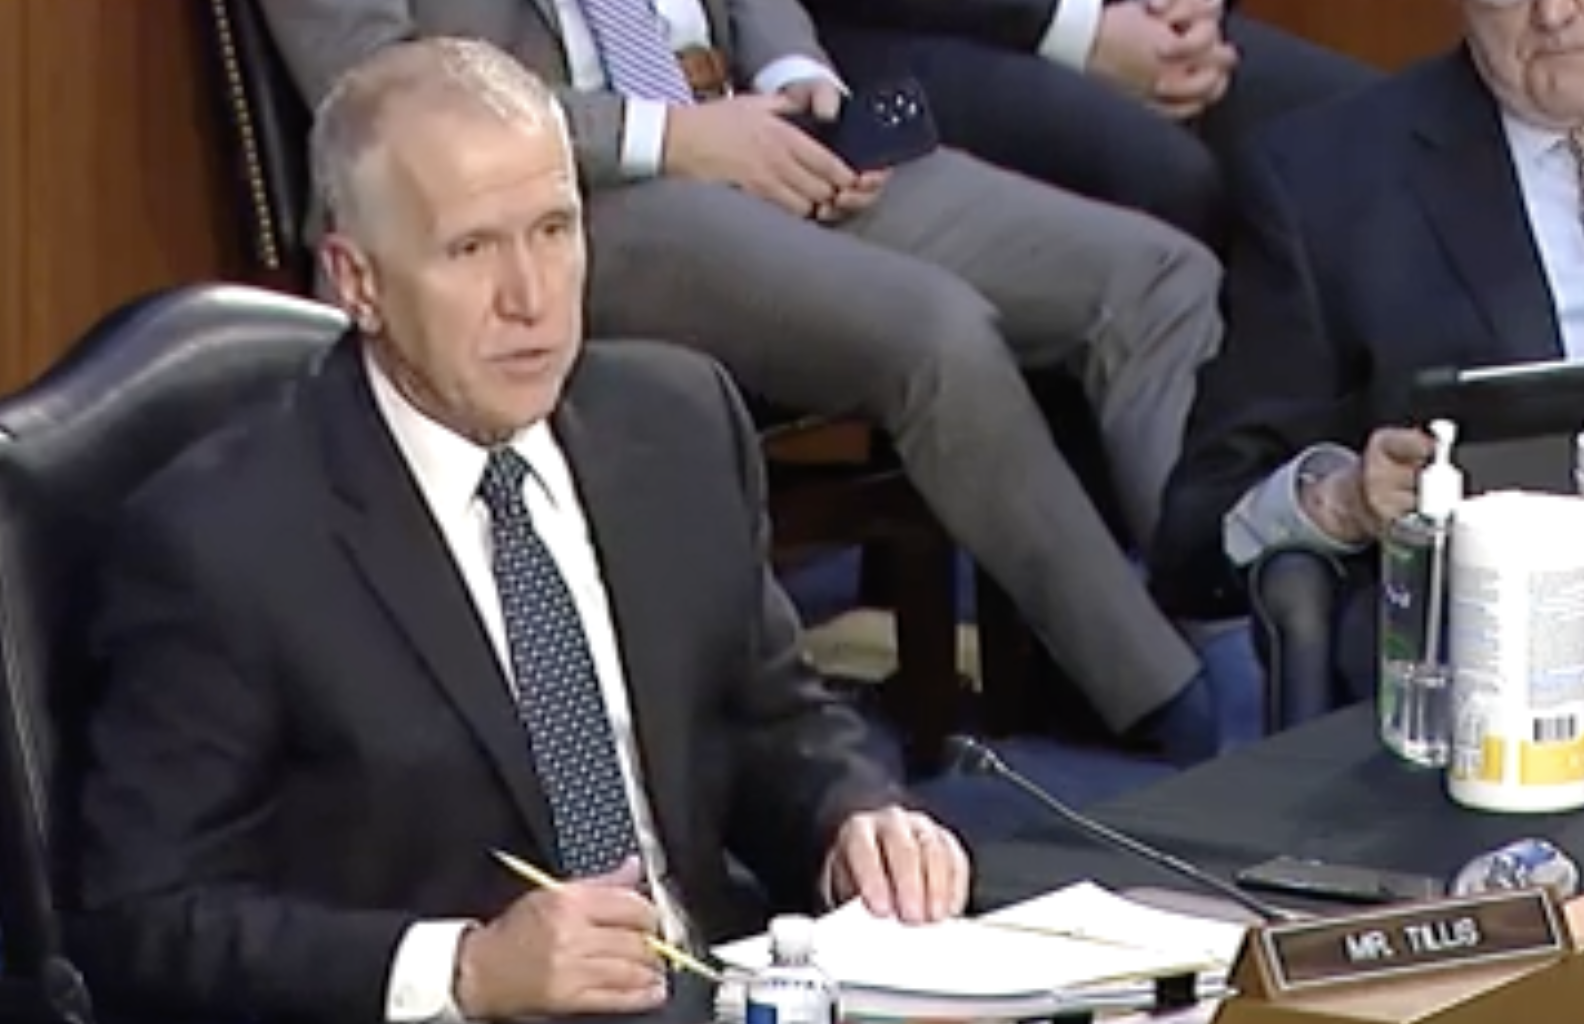 U.S. Sen. Thom Tillis, R-NC delivers opening remarks during the Senate Judiciary Committee hearing on the nomination of Ketanji Brown Jackson to be an Associate Justice of the U.S. Supreme Court.